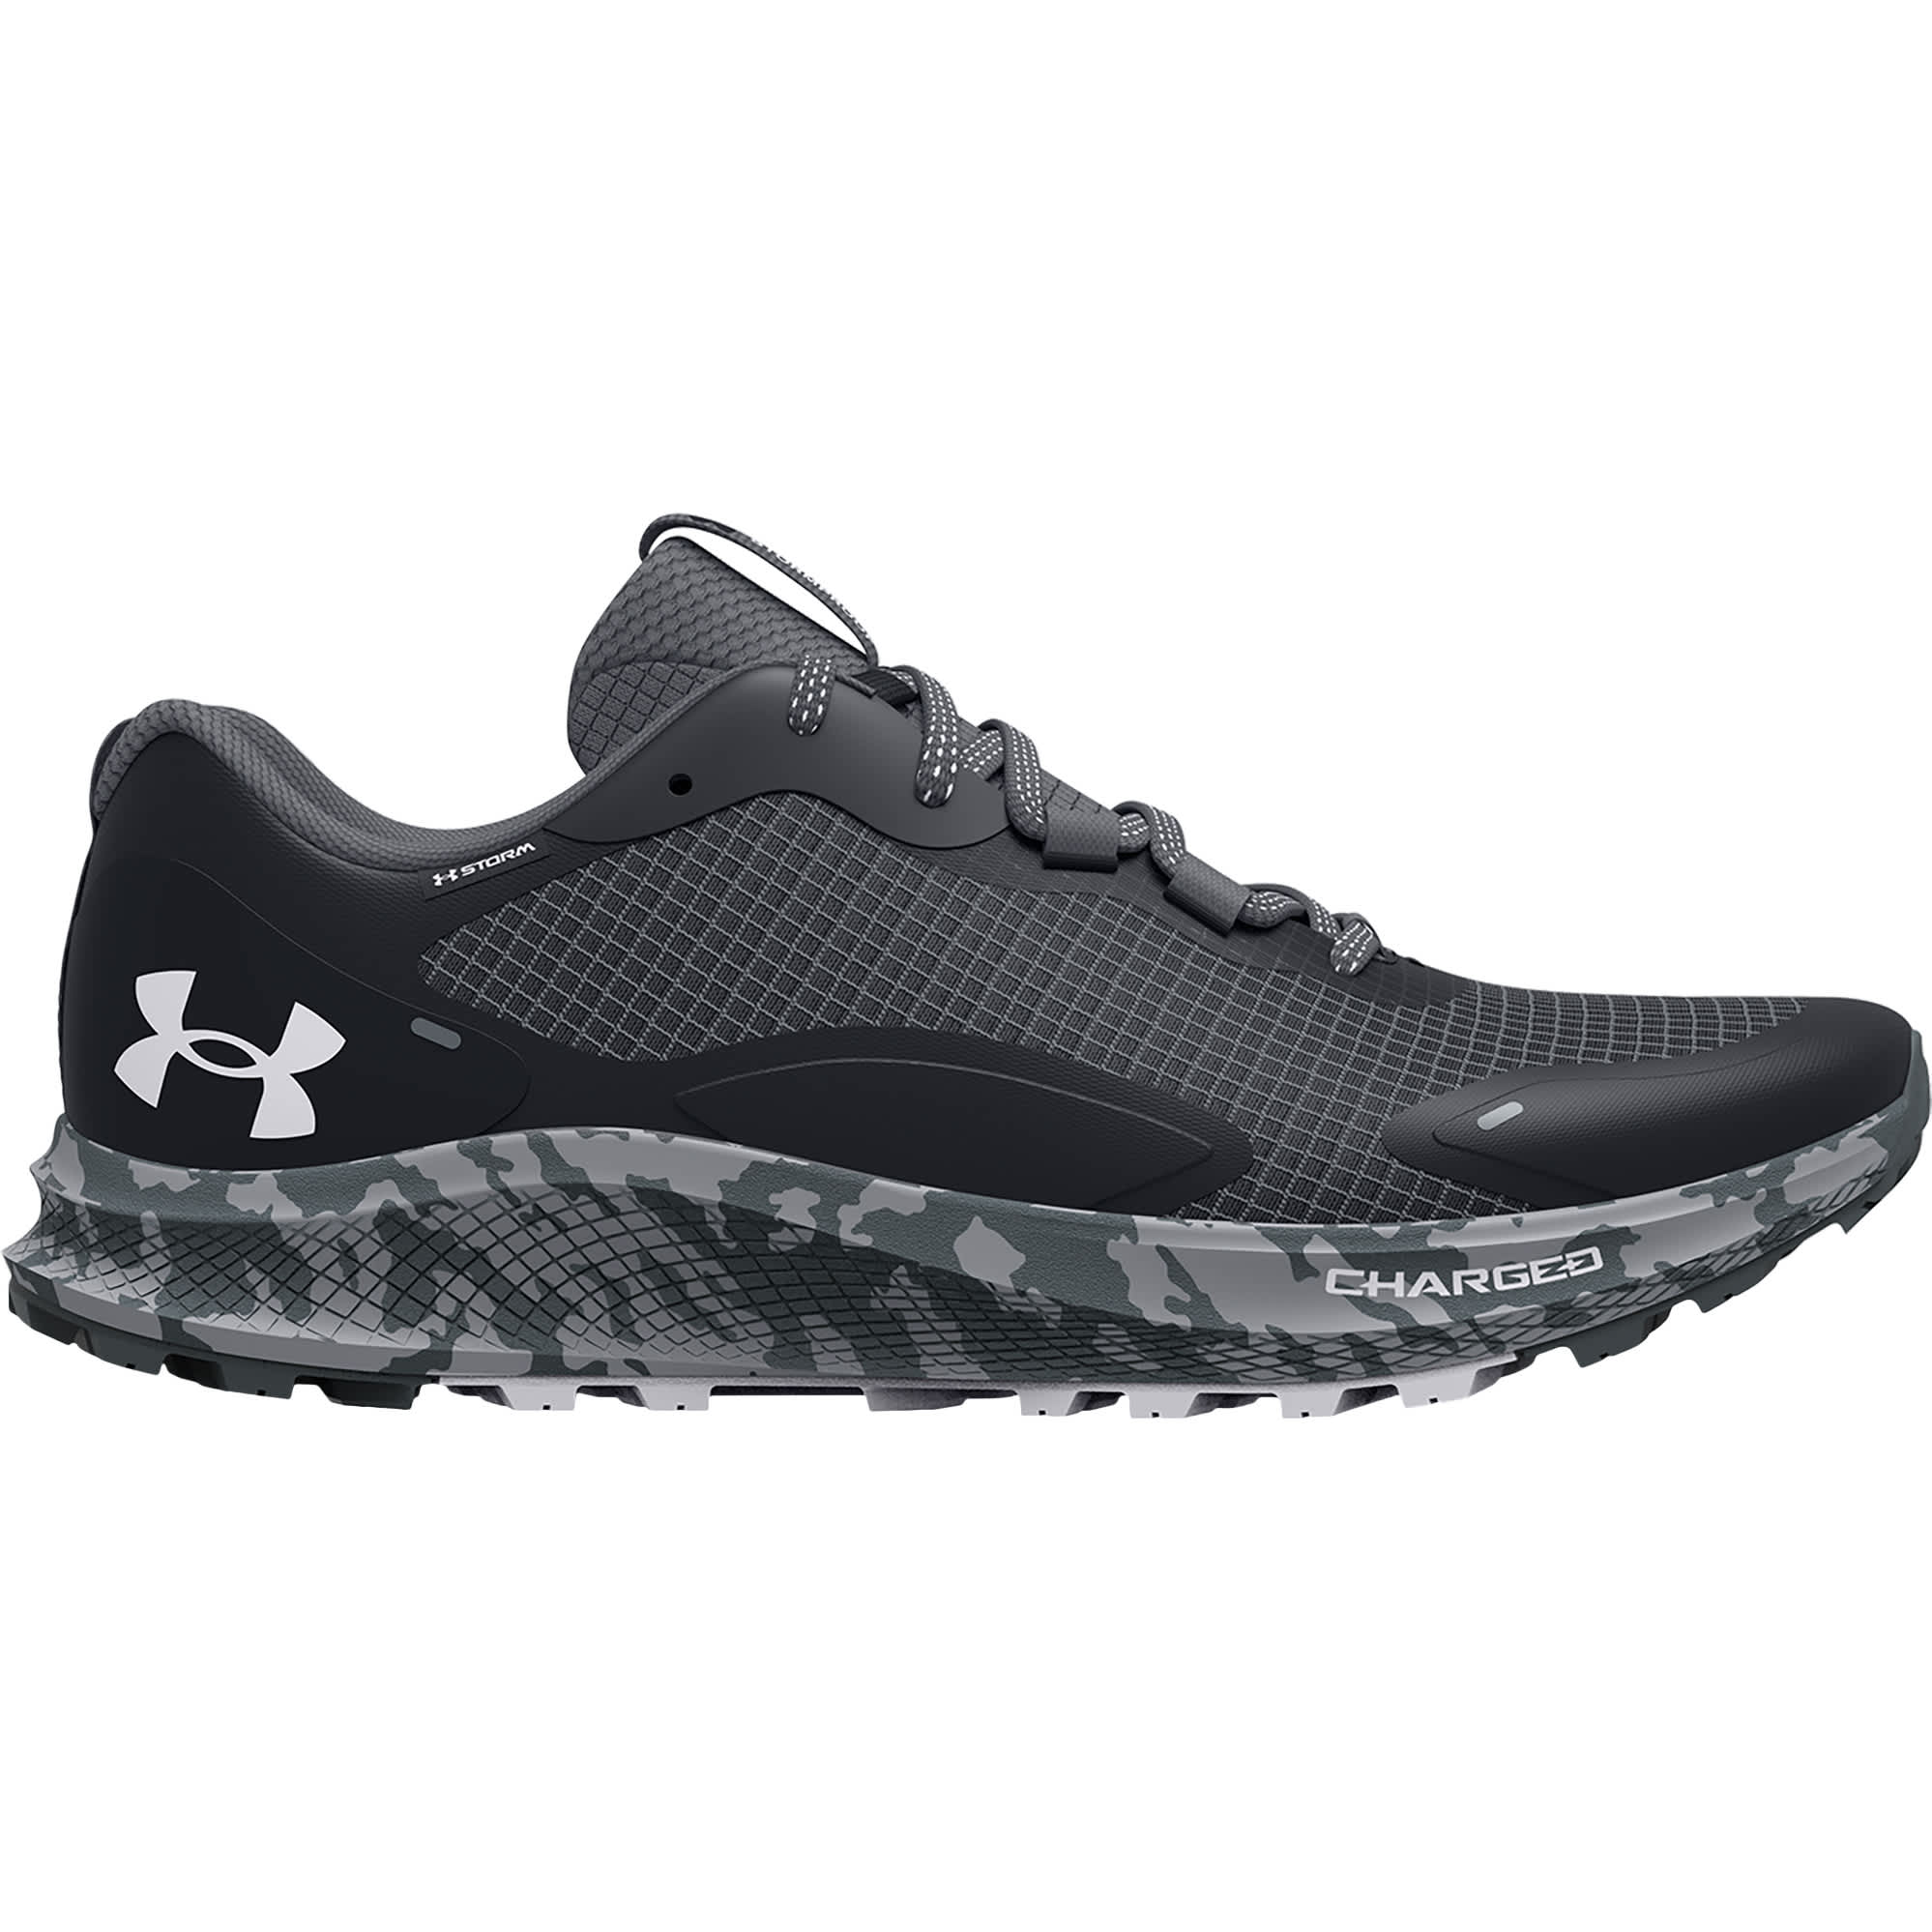 Under Armour® Men’s Charged Bandit Trail 2 Running Shoes